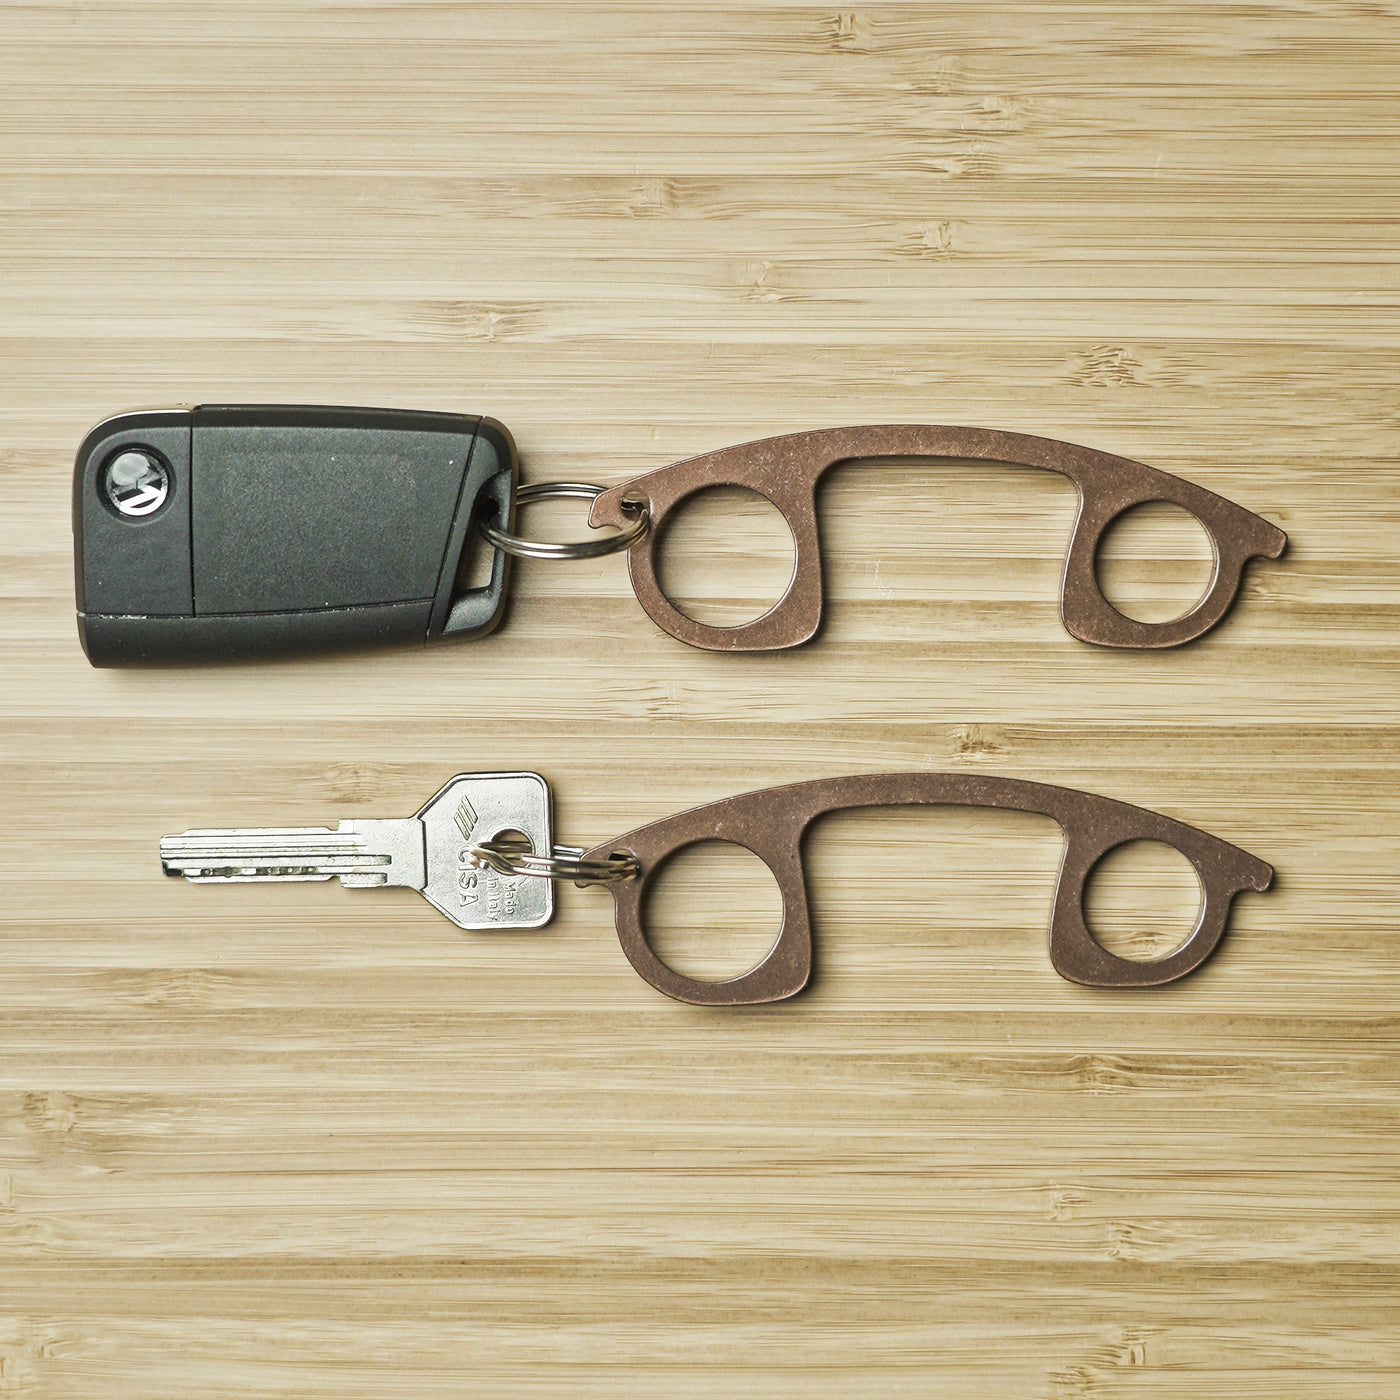 SPEC-DNT - No-touch keyring tool